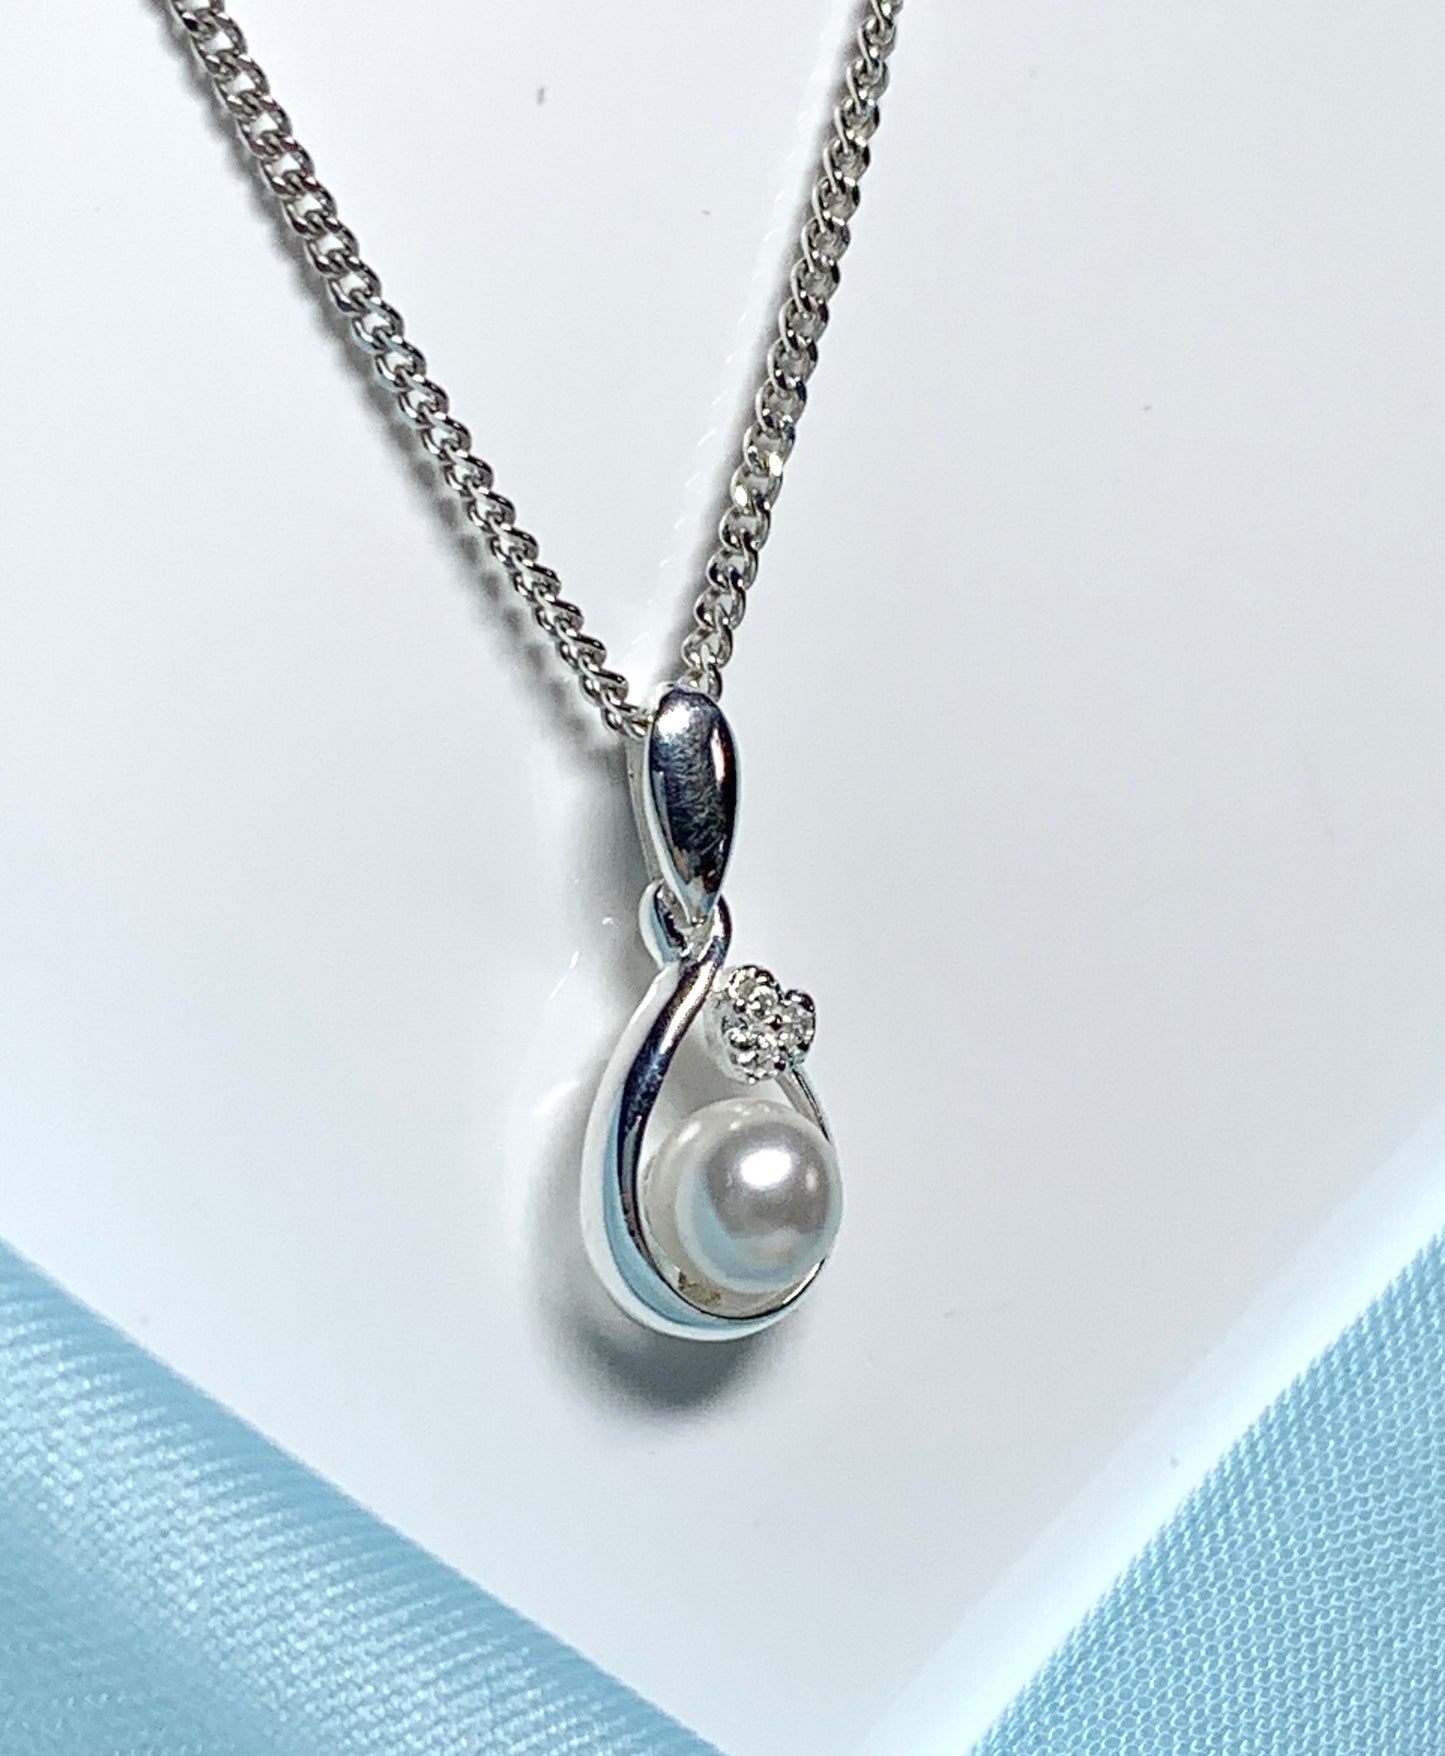 Real freshwater pearl necklace sparkling drop pendant